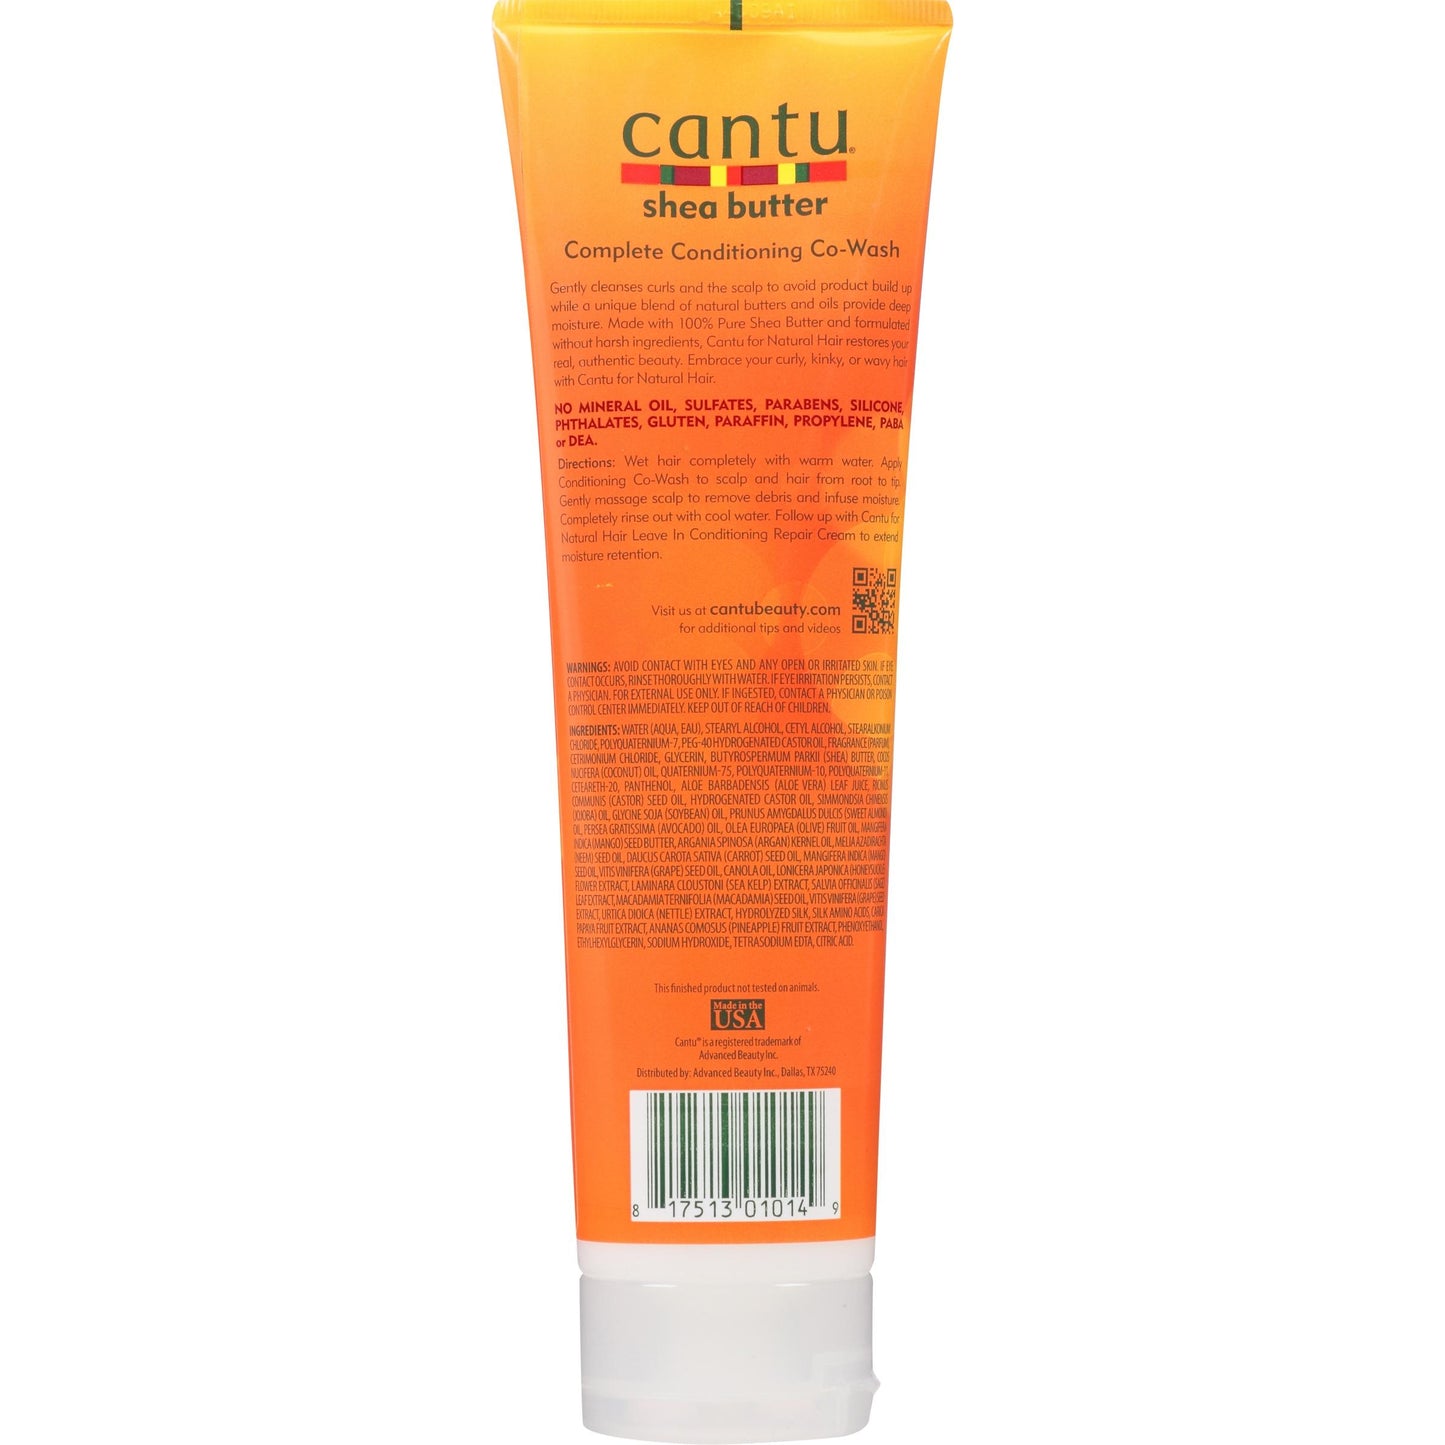 Cantu Shea Butter for Natural Hair Complete Conditioning Co-Wash 10 oz. (Packaging may vary)